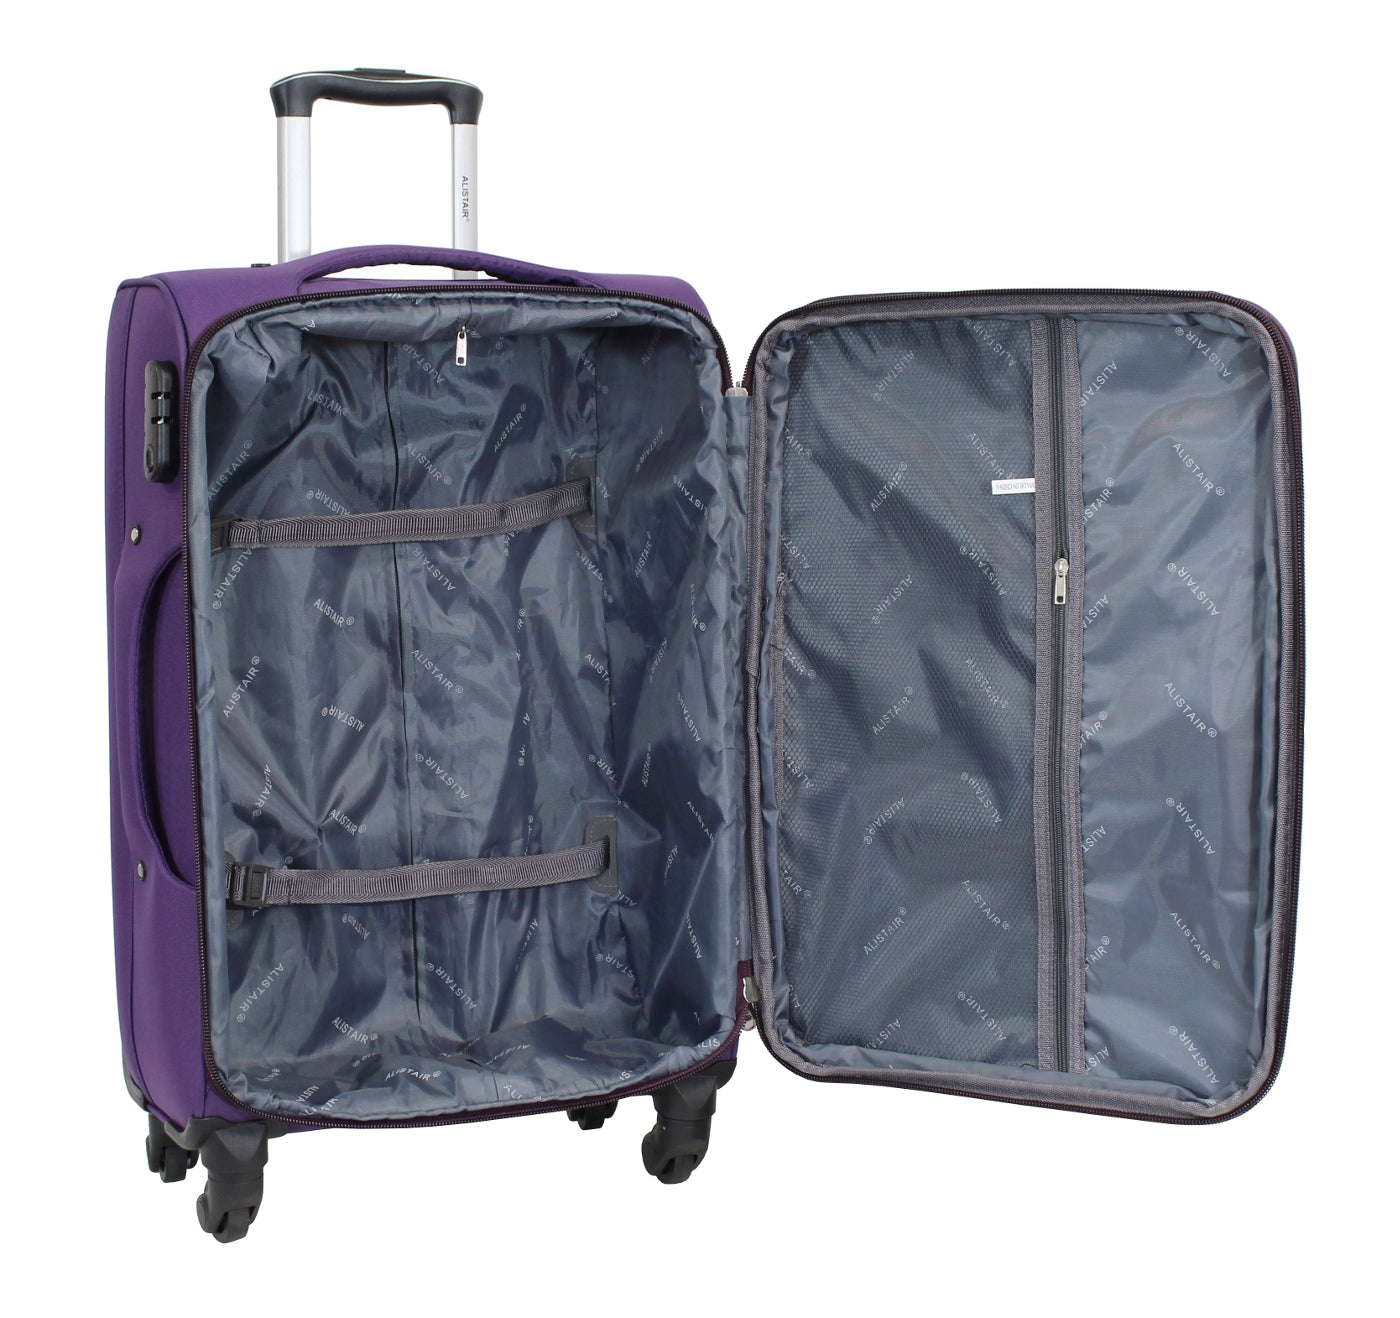 Alistair "Plume" Valise Taille Moyenne 67cm